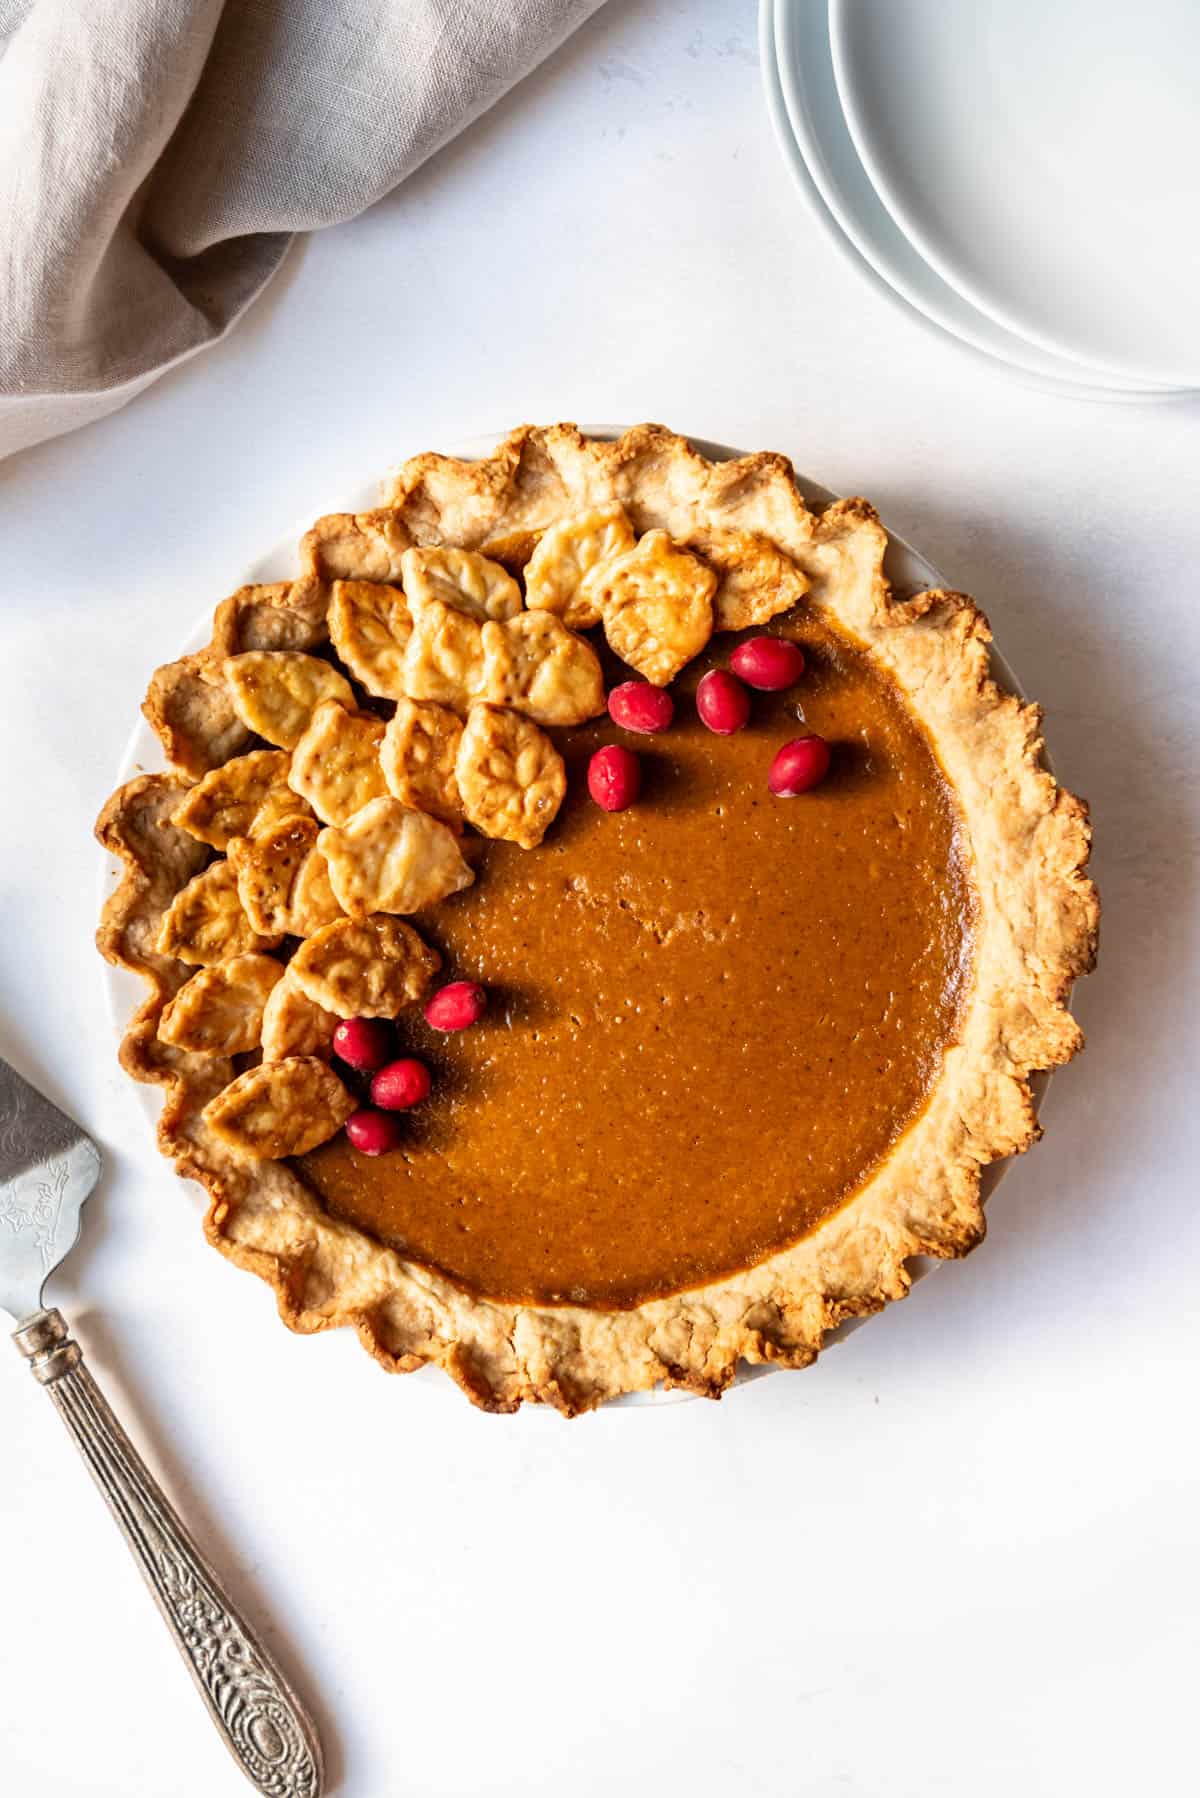 A fully baked and decorated pumpkin pie.